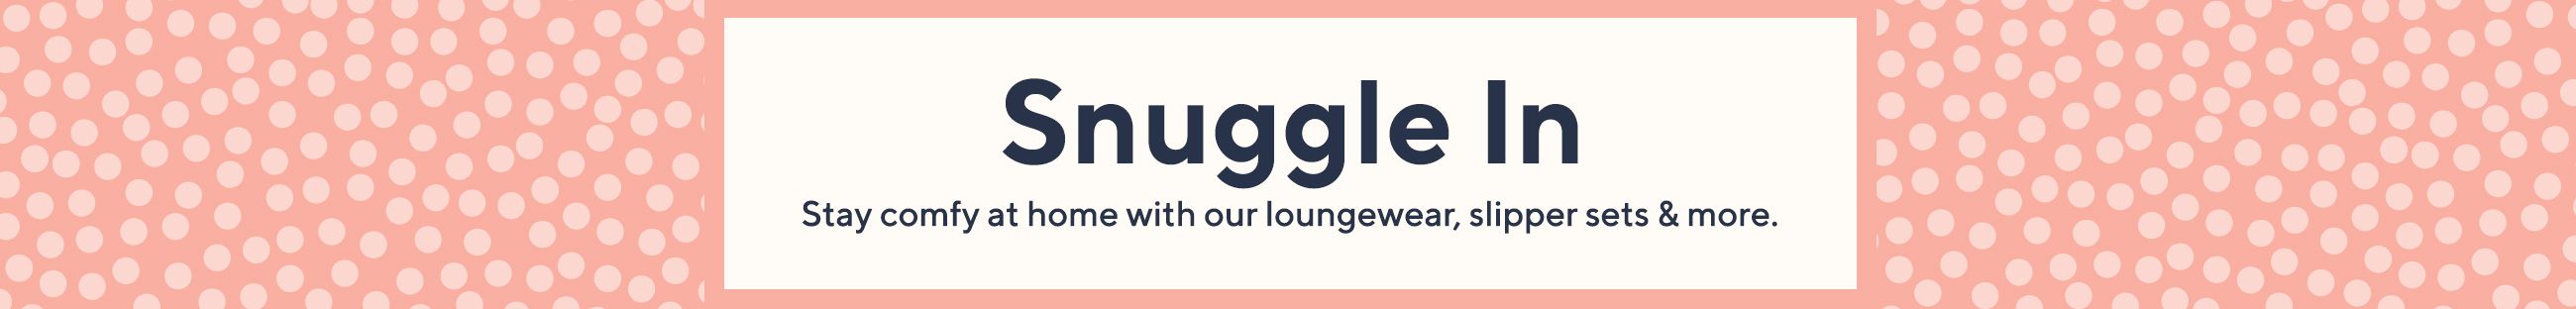 Snuggle In  Stay comfy at home with loungewear, slippers, sets & more.